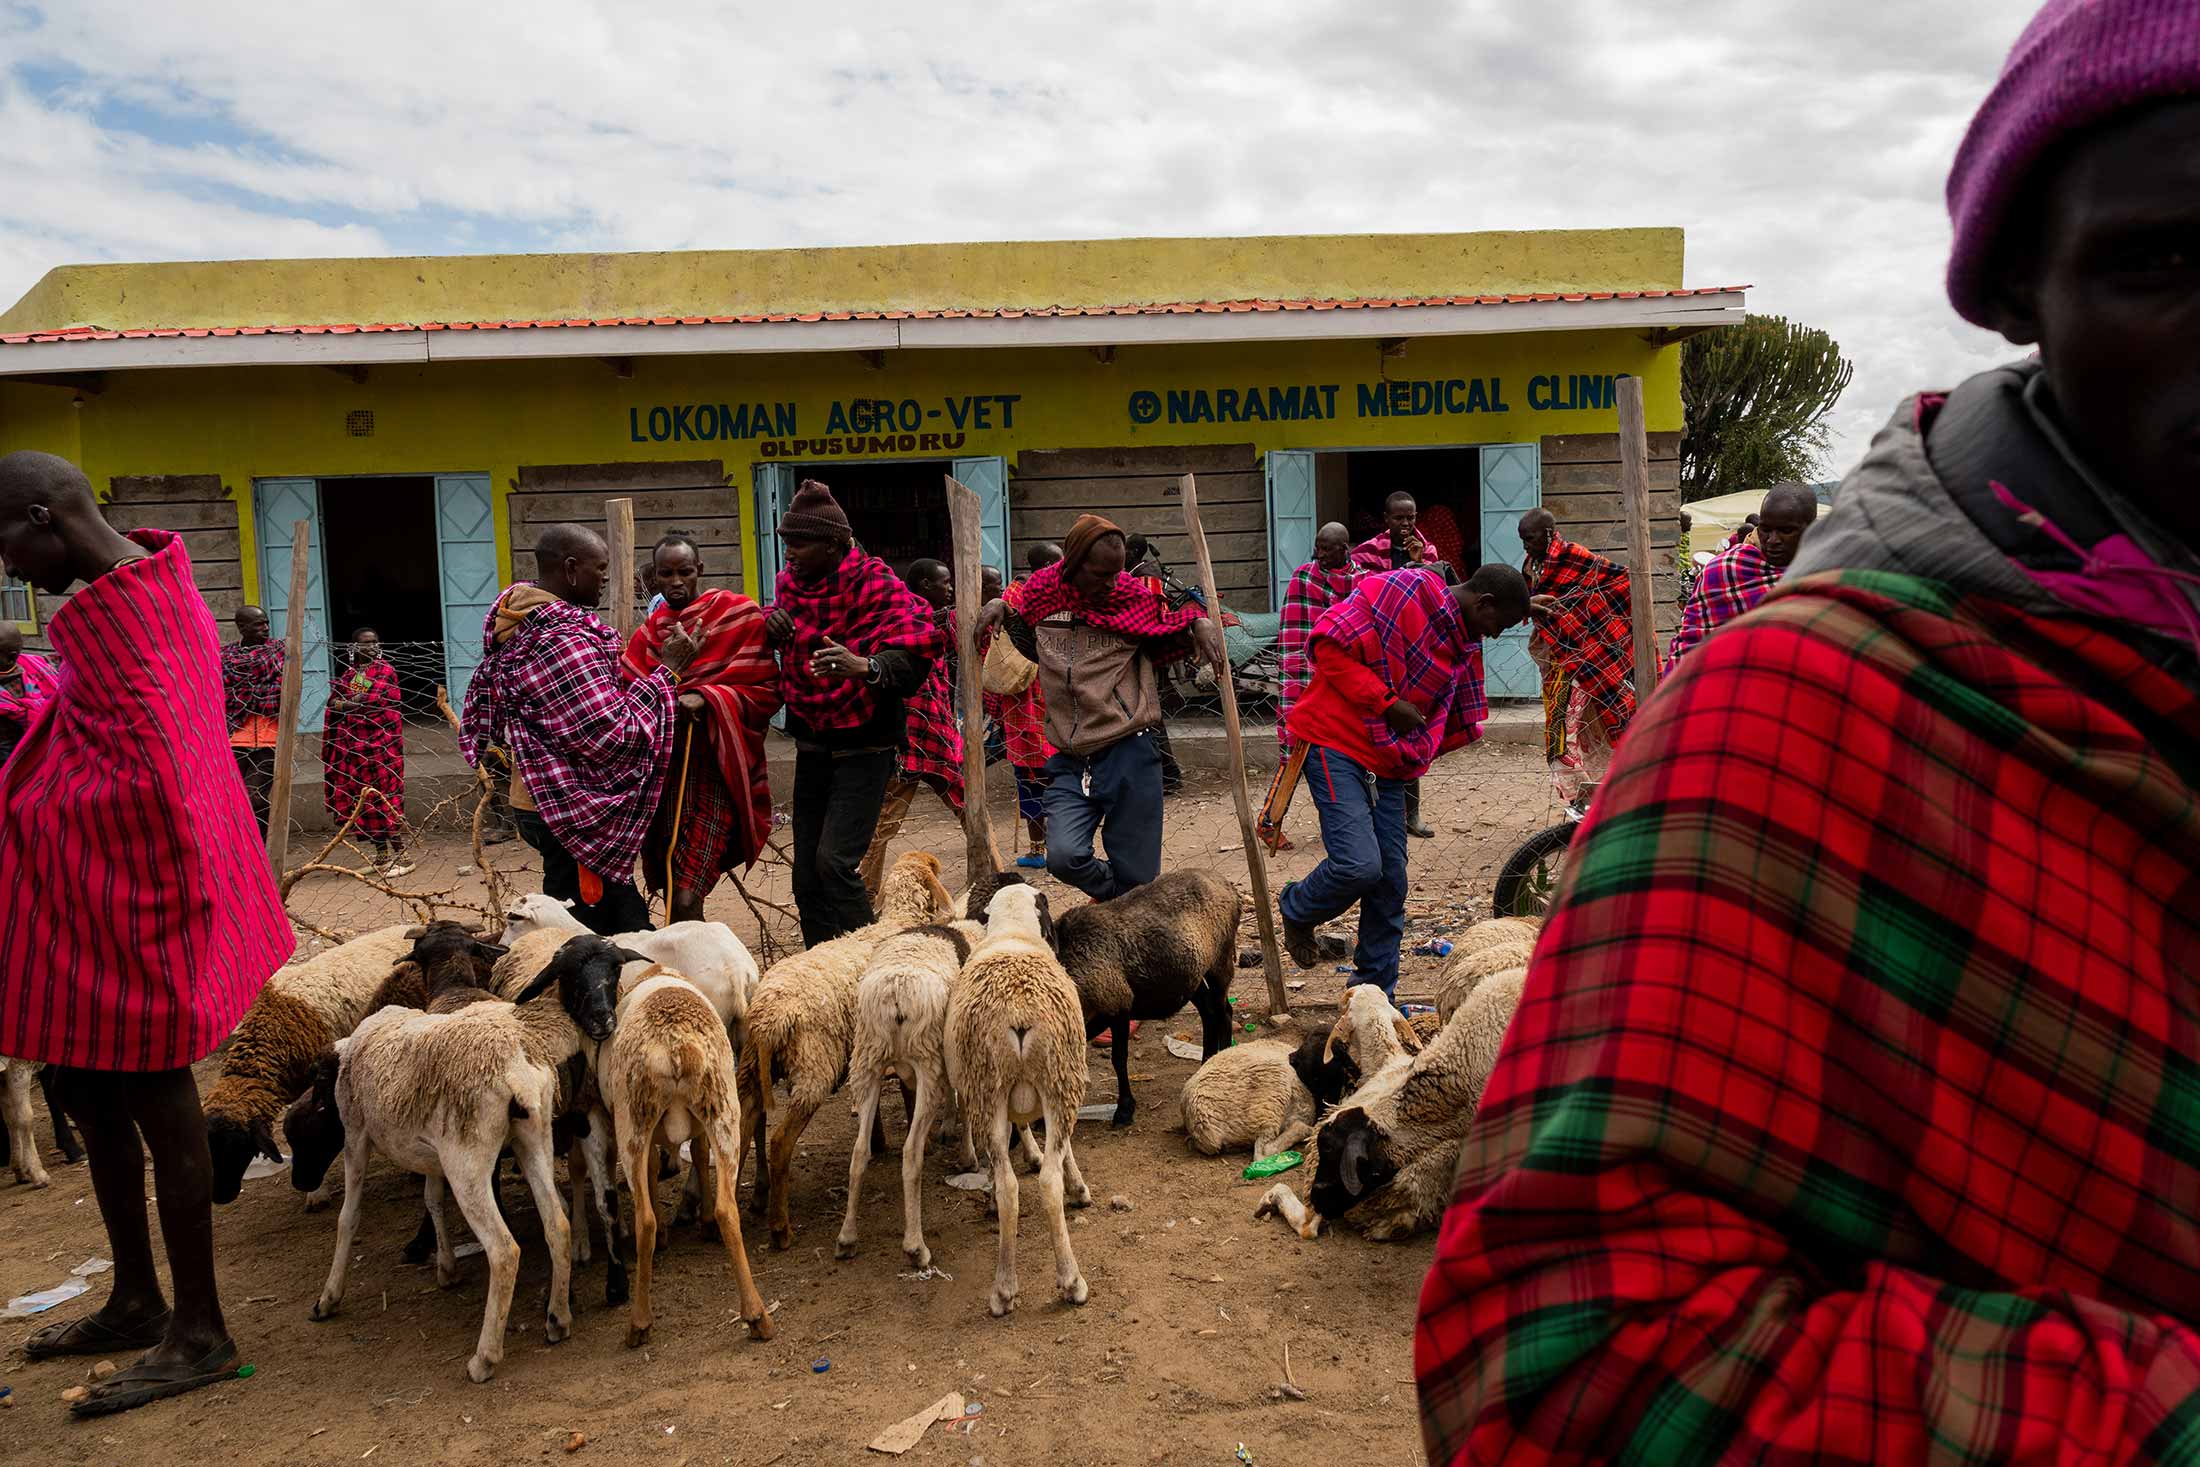 Africa's Maasai Tribe Seek Royalties for Commercial Use of Their